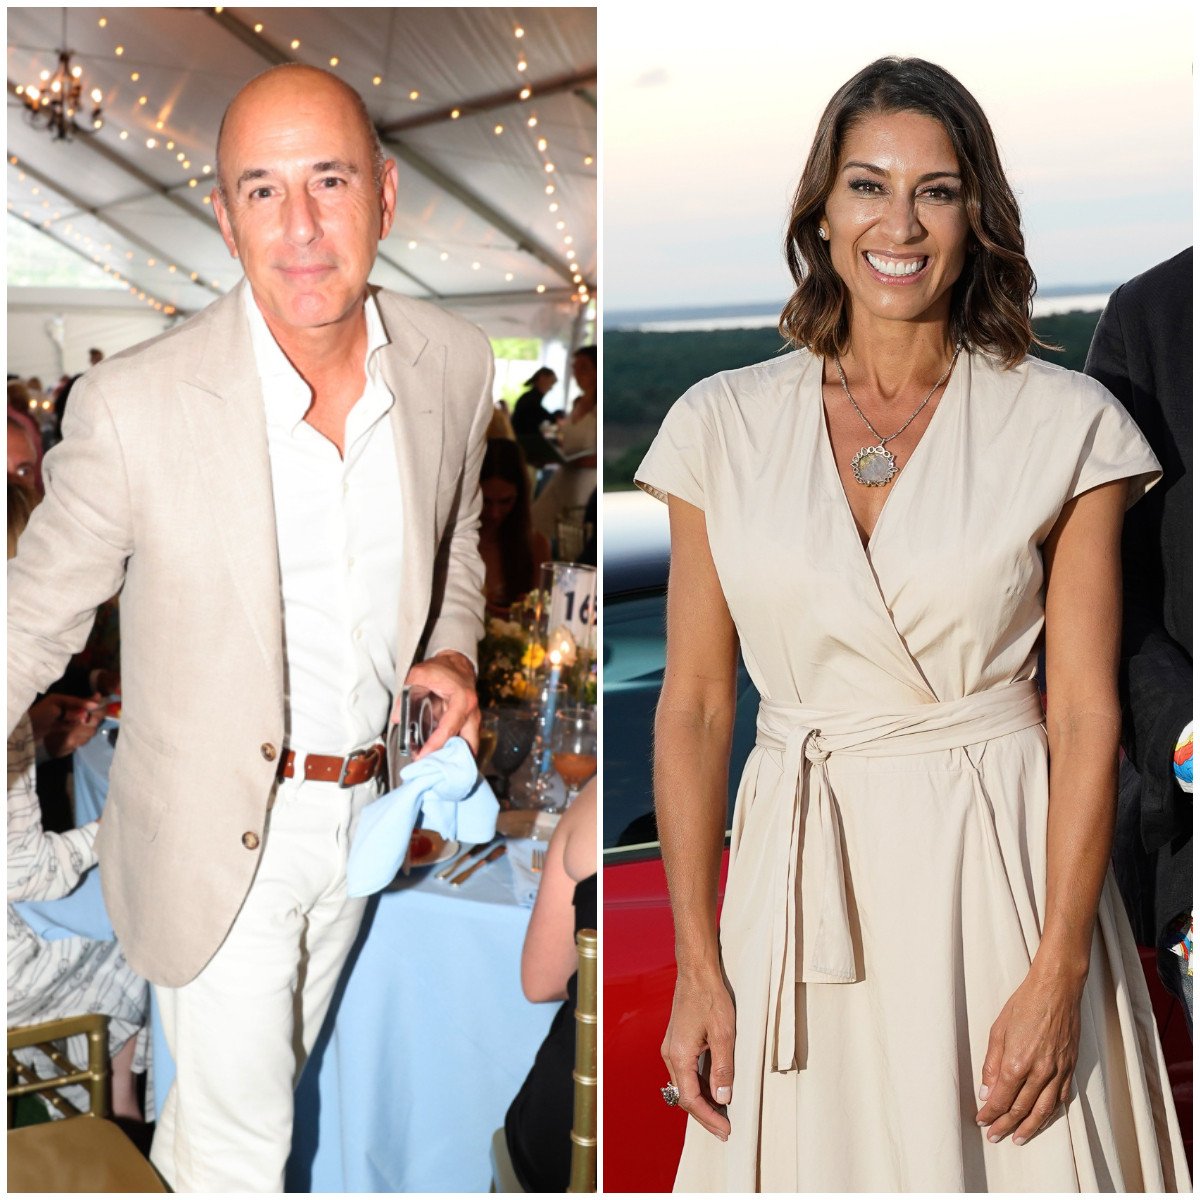 Matt Lauer may be persona non grata in celebrity circles, but his girlfriend Shamin Abas is sticking by his side. Photos: WireImage, Getty Images